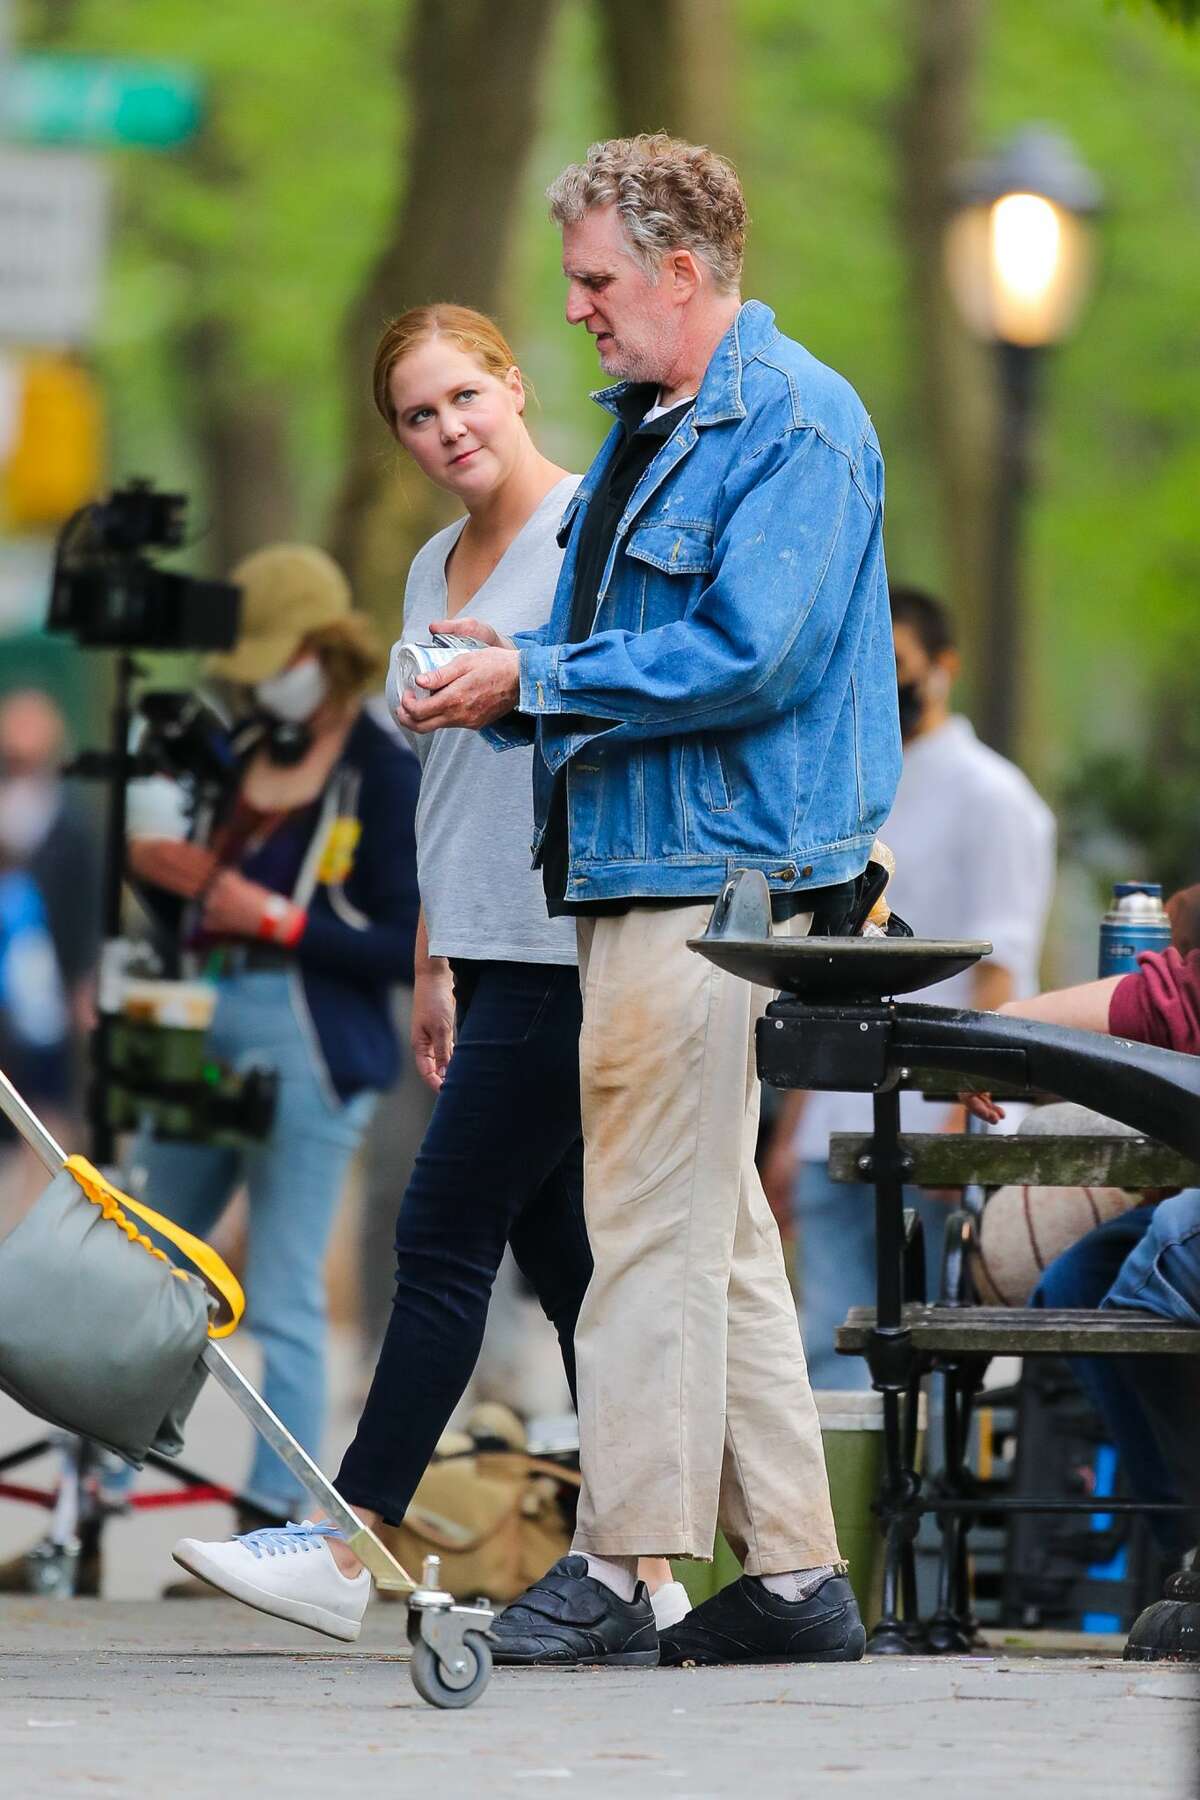 Amy Schumer and Michael Rapaport are seen filming the Hulu series "Life & Beth" on April 28, 2021 in New York City. The production is now shooting in Dutchess County, the latest in a long list of TV and film productions to shoot in the region.